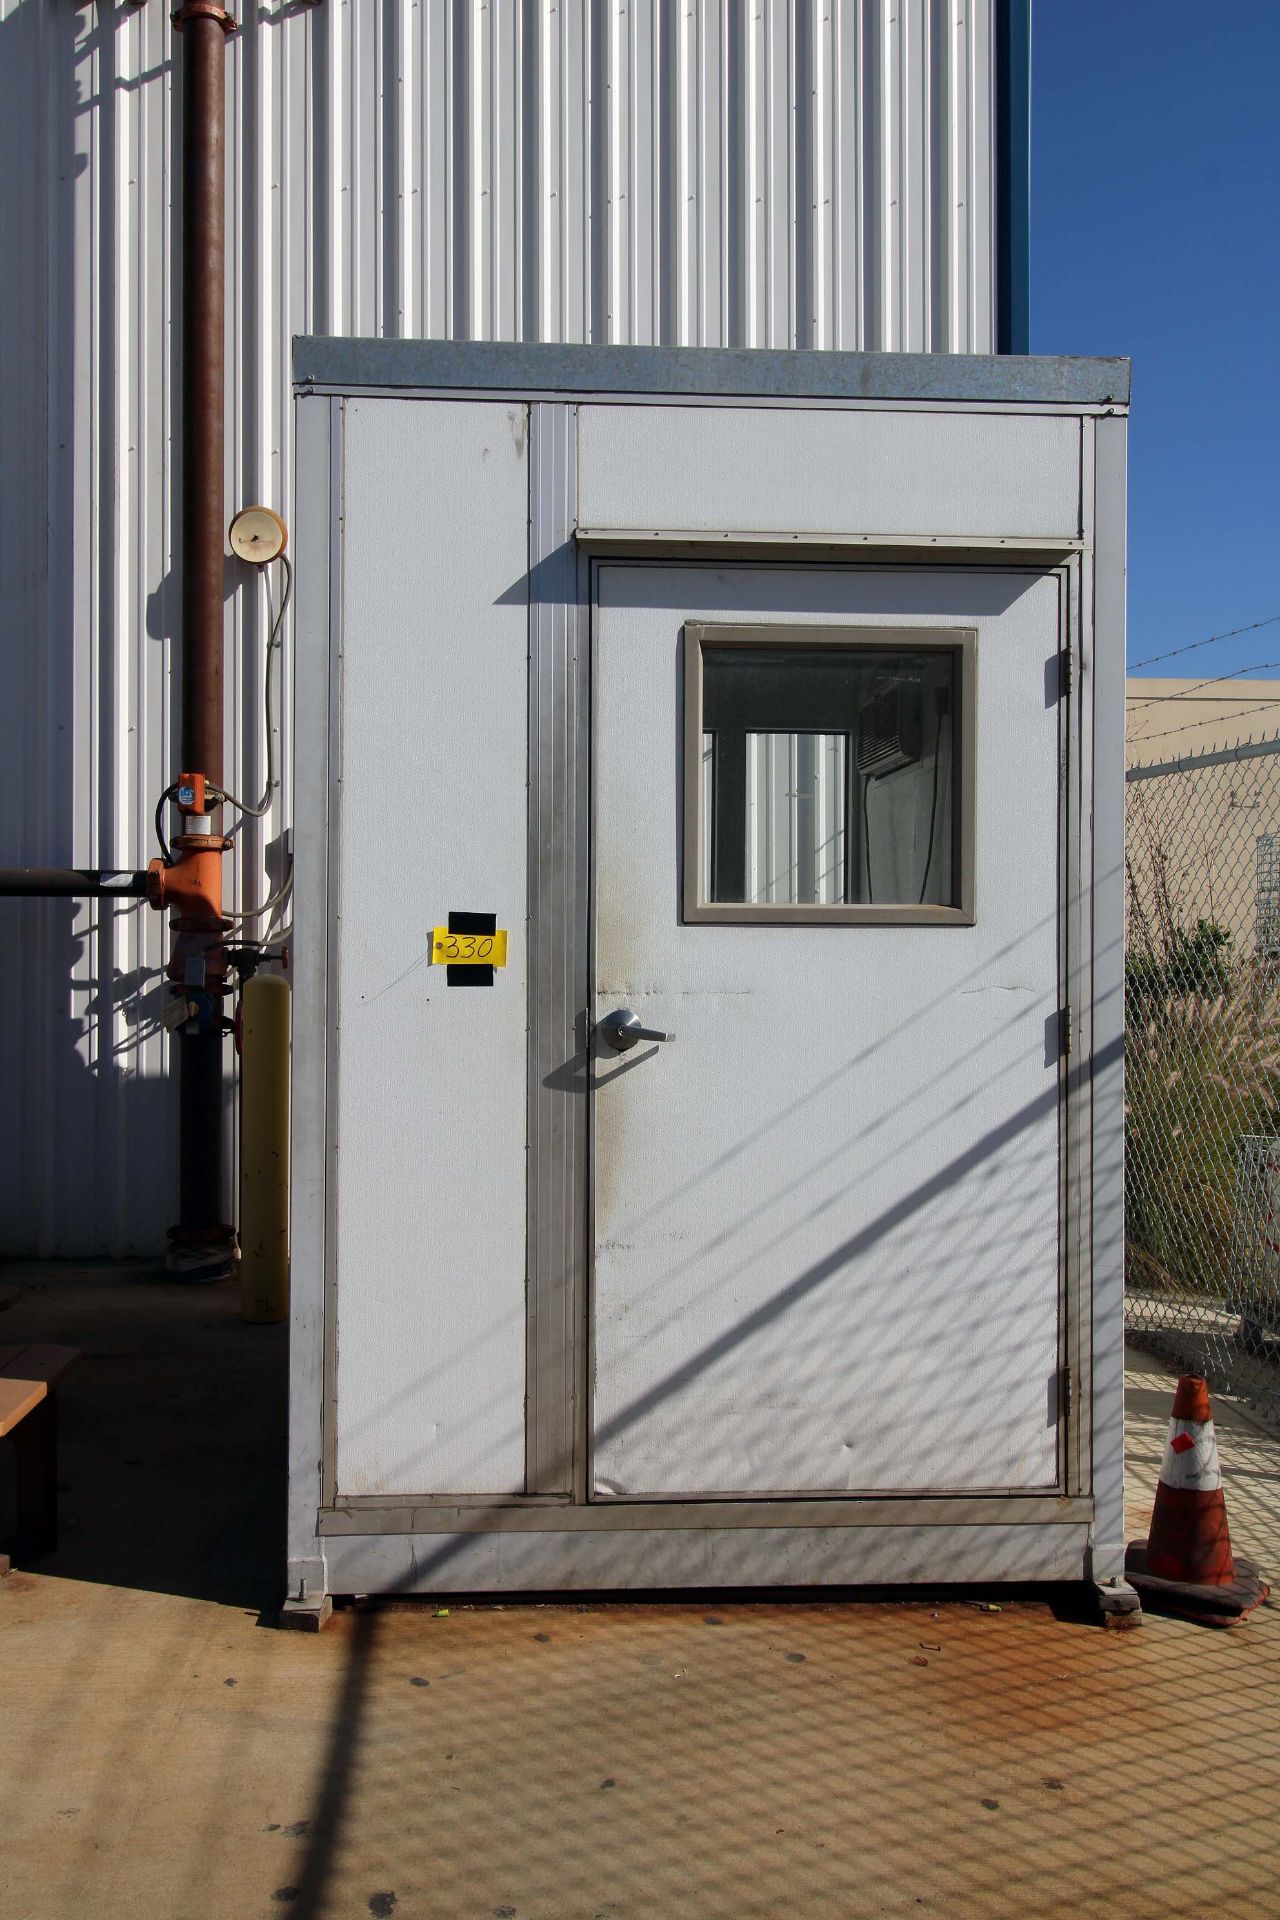 PORTABLE OUTDOOR BUILDING, 8' X 6' INTERIOR DIMS., insulated panel walls, multiple windows, entry - Image 2 of 5